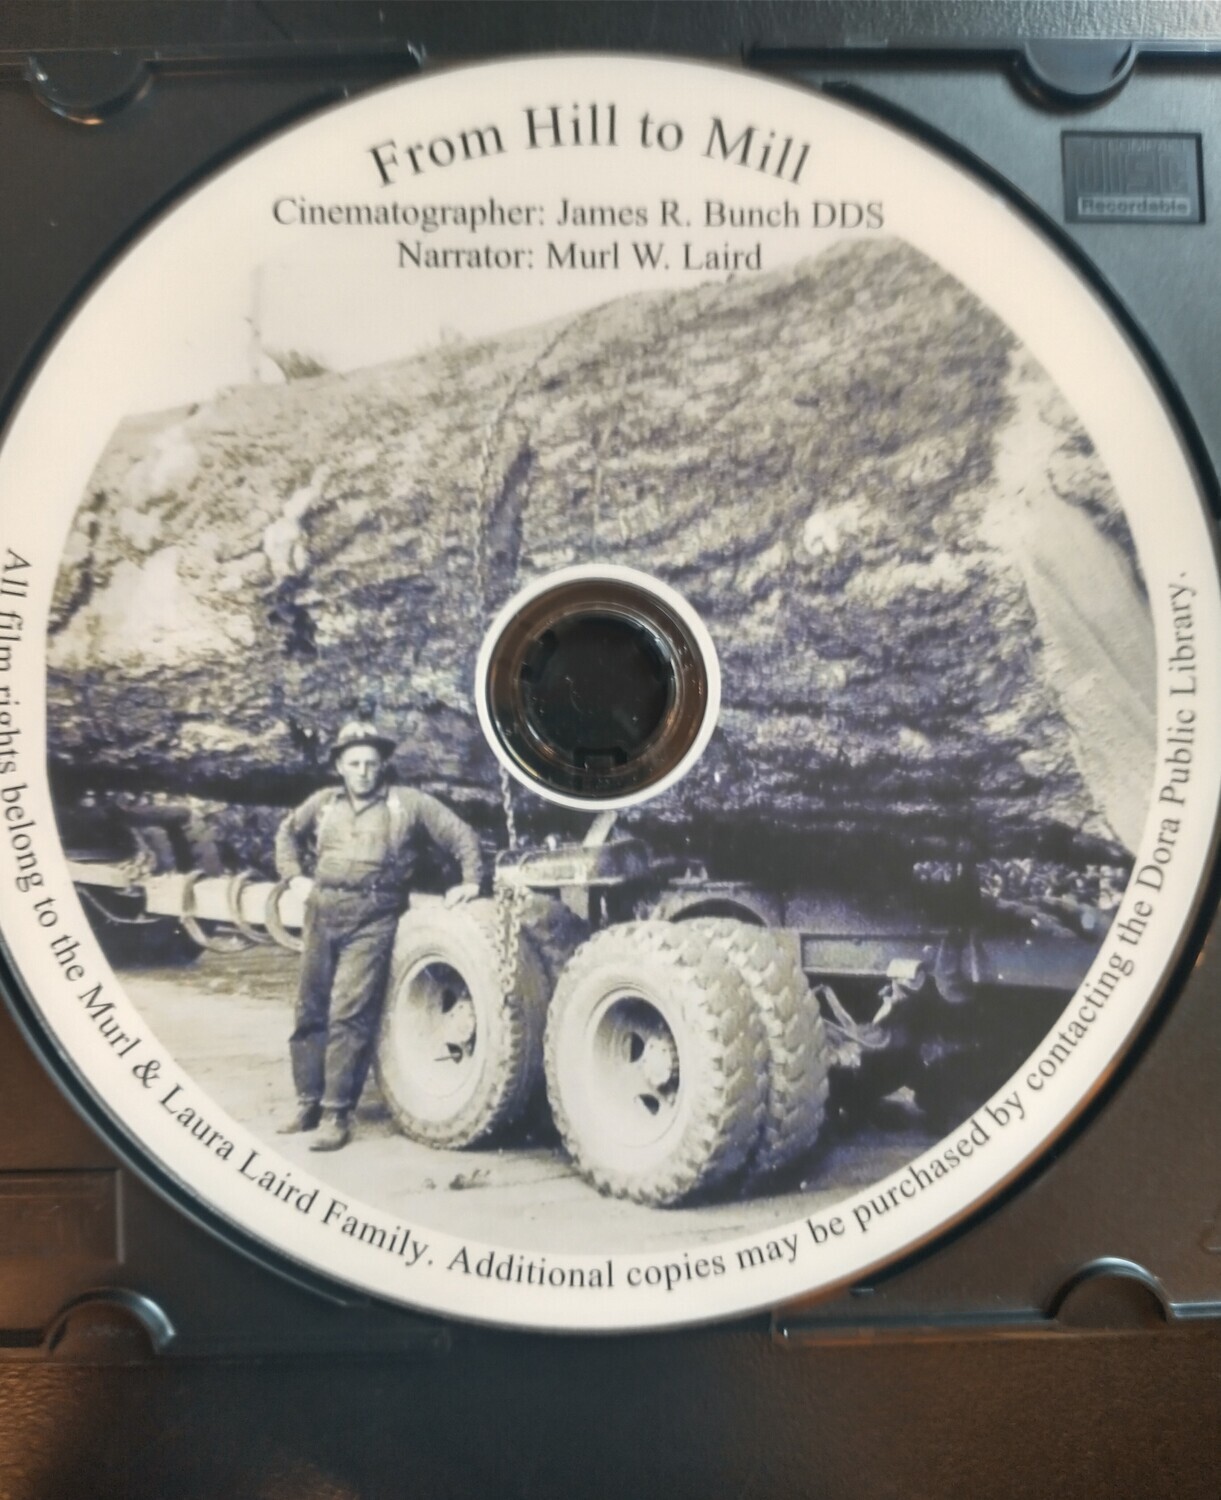 From Hill to Mill DVD